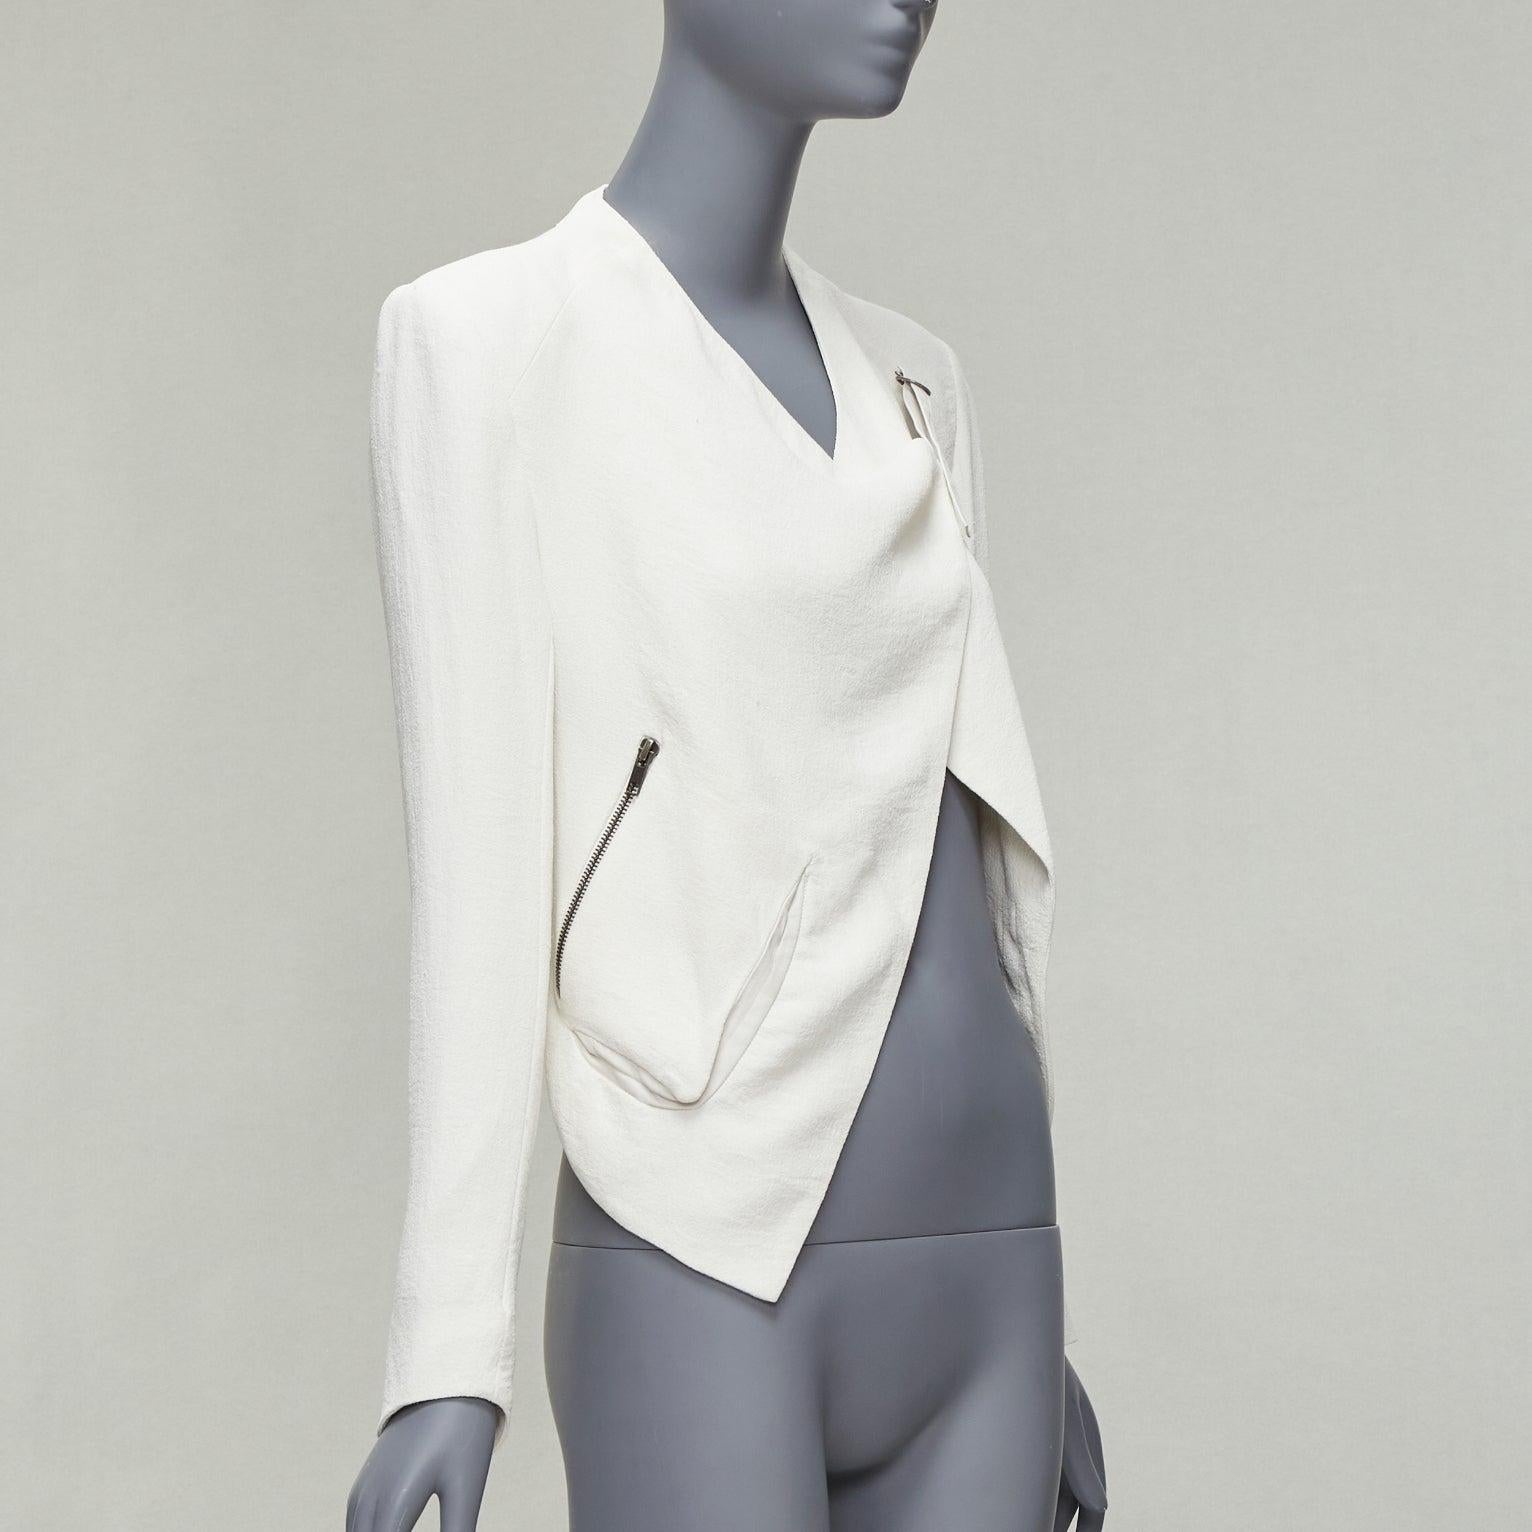 HELMUT LANG white lambskin leather trim asymmetric zip biker jacket US0 XS
Reference: CELG/A00396
Brand: Helmut Lang
Material: Polyester, Lambskin Leather
Color: White
Pattern: Solid
Closure: Belt
Lining: White Fabric
Extra Details: Belt closure at